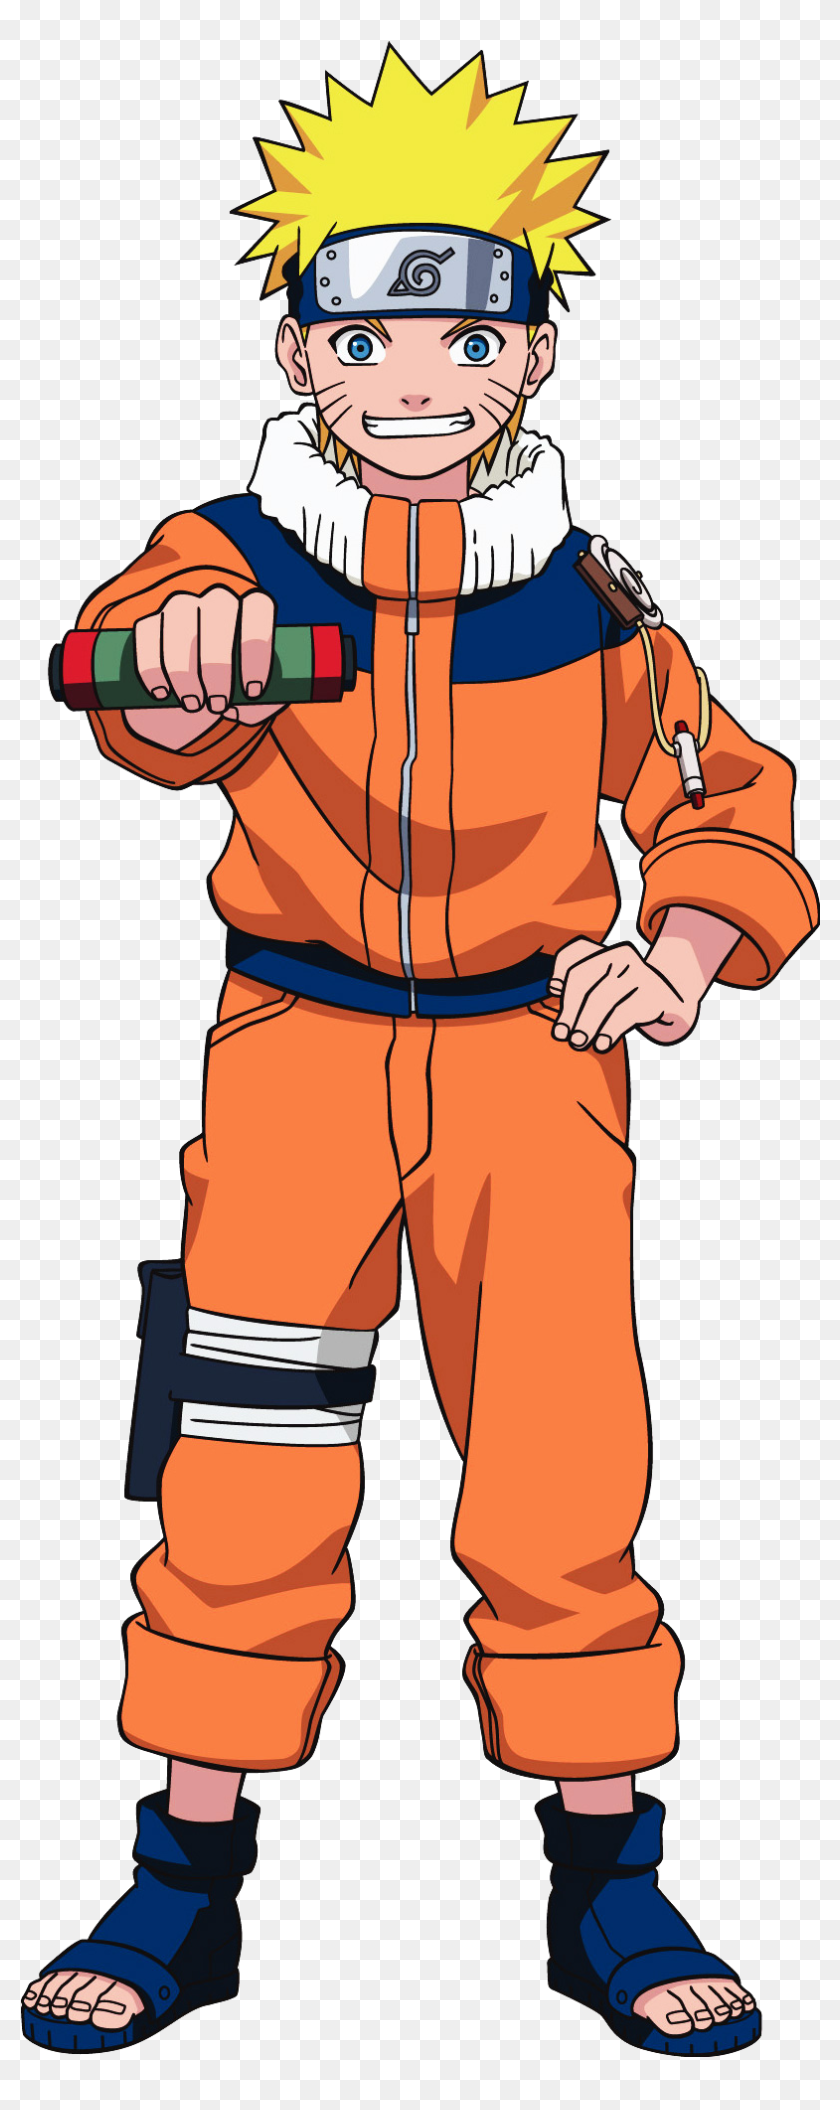 Find hd Naruto Uzumaki Png - Young Naruto Full Body, Transparent Png.is fre...